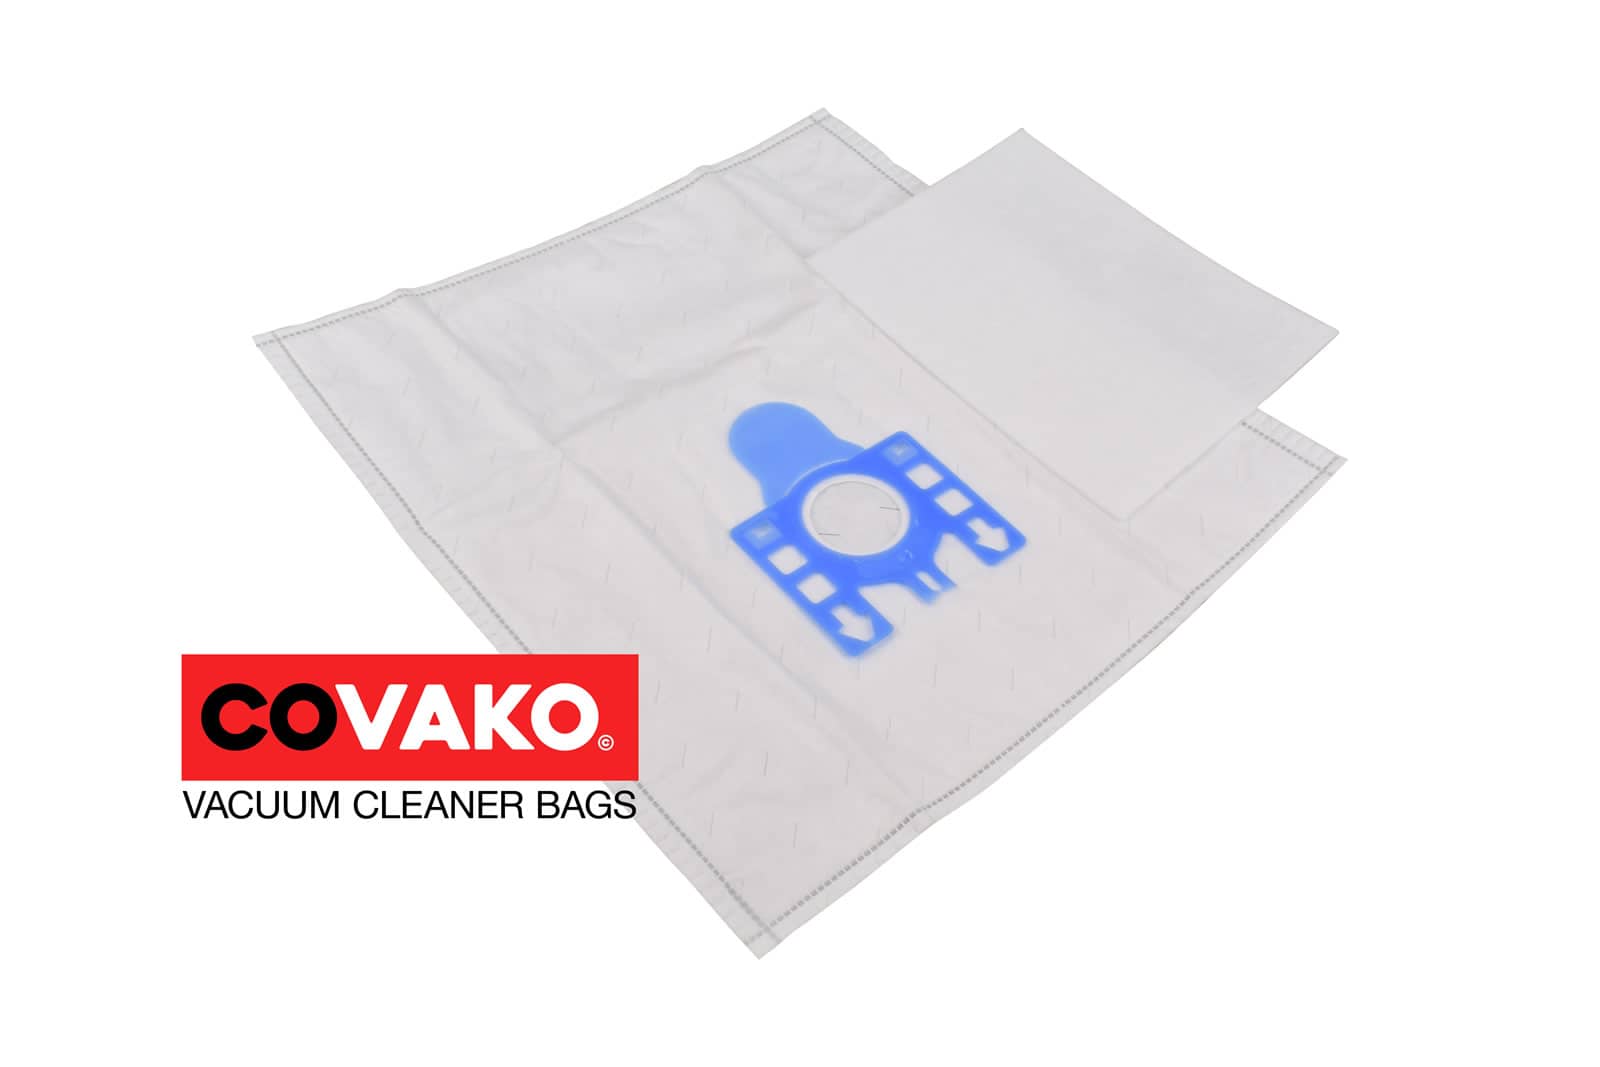 Electrolux CE Jubilee-Vampyr / Synthesis - Electrolux vacuum cleaner bags